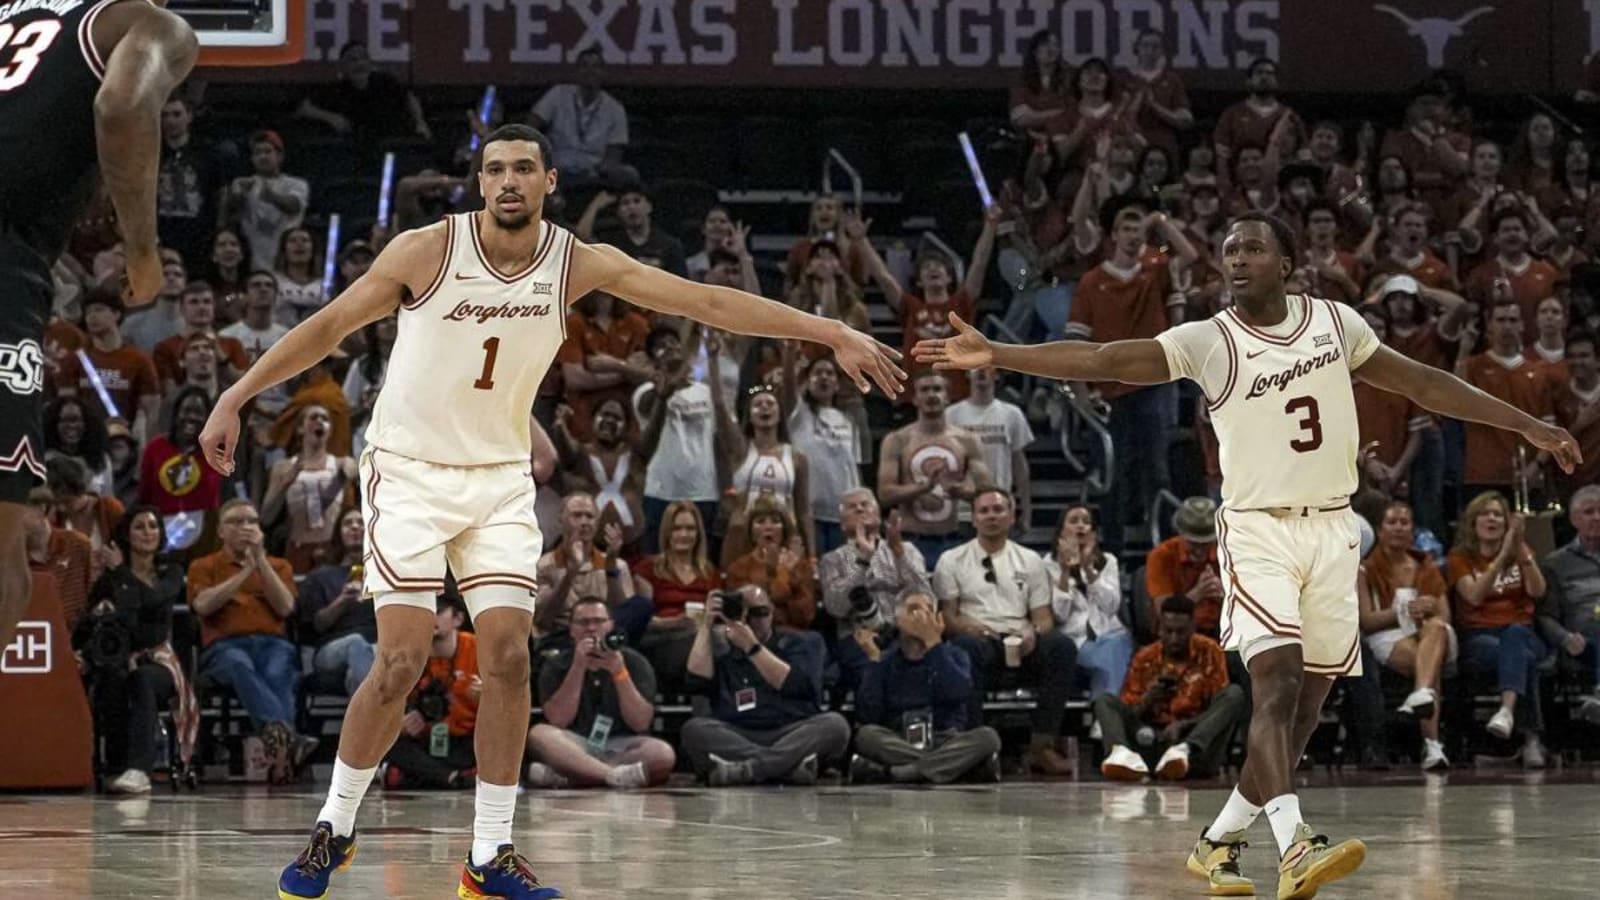 Two Longhorns Earn All-Big 12 Spots As March Madness Heats Up